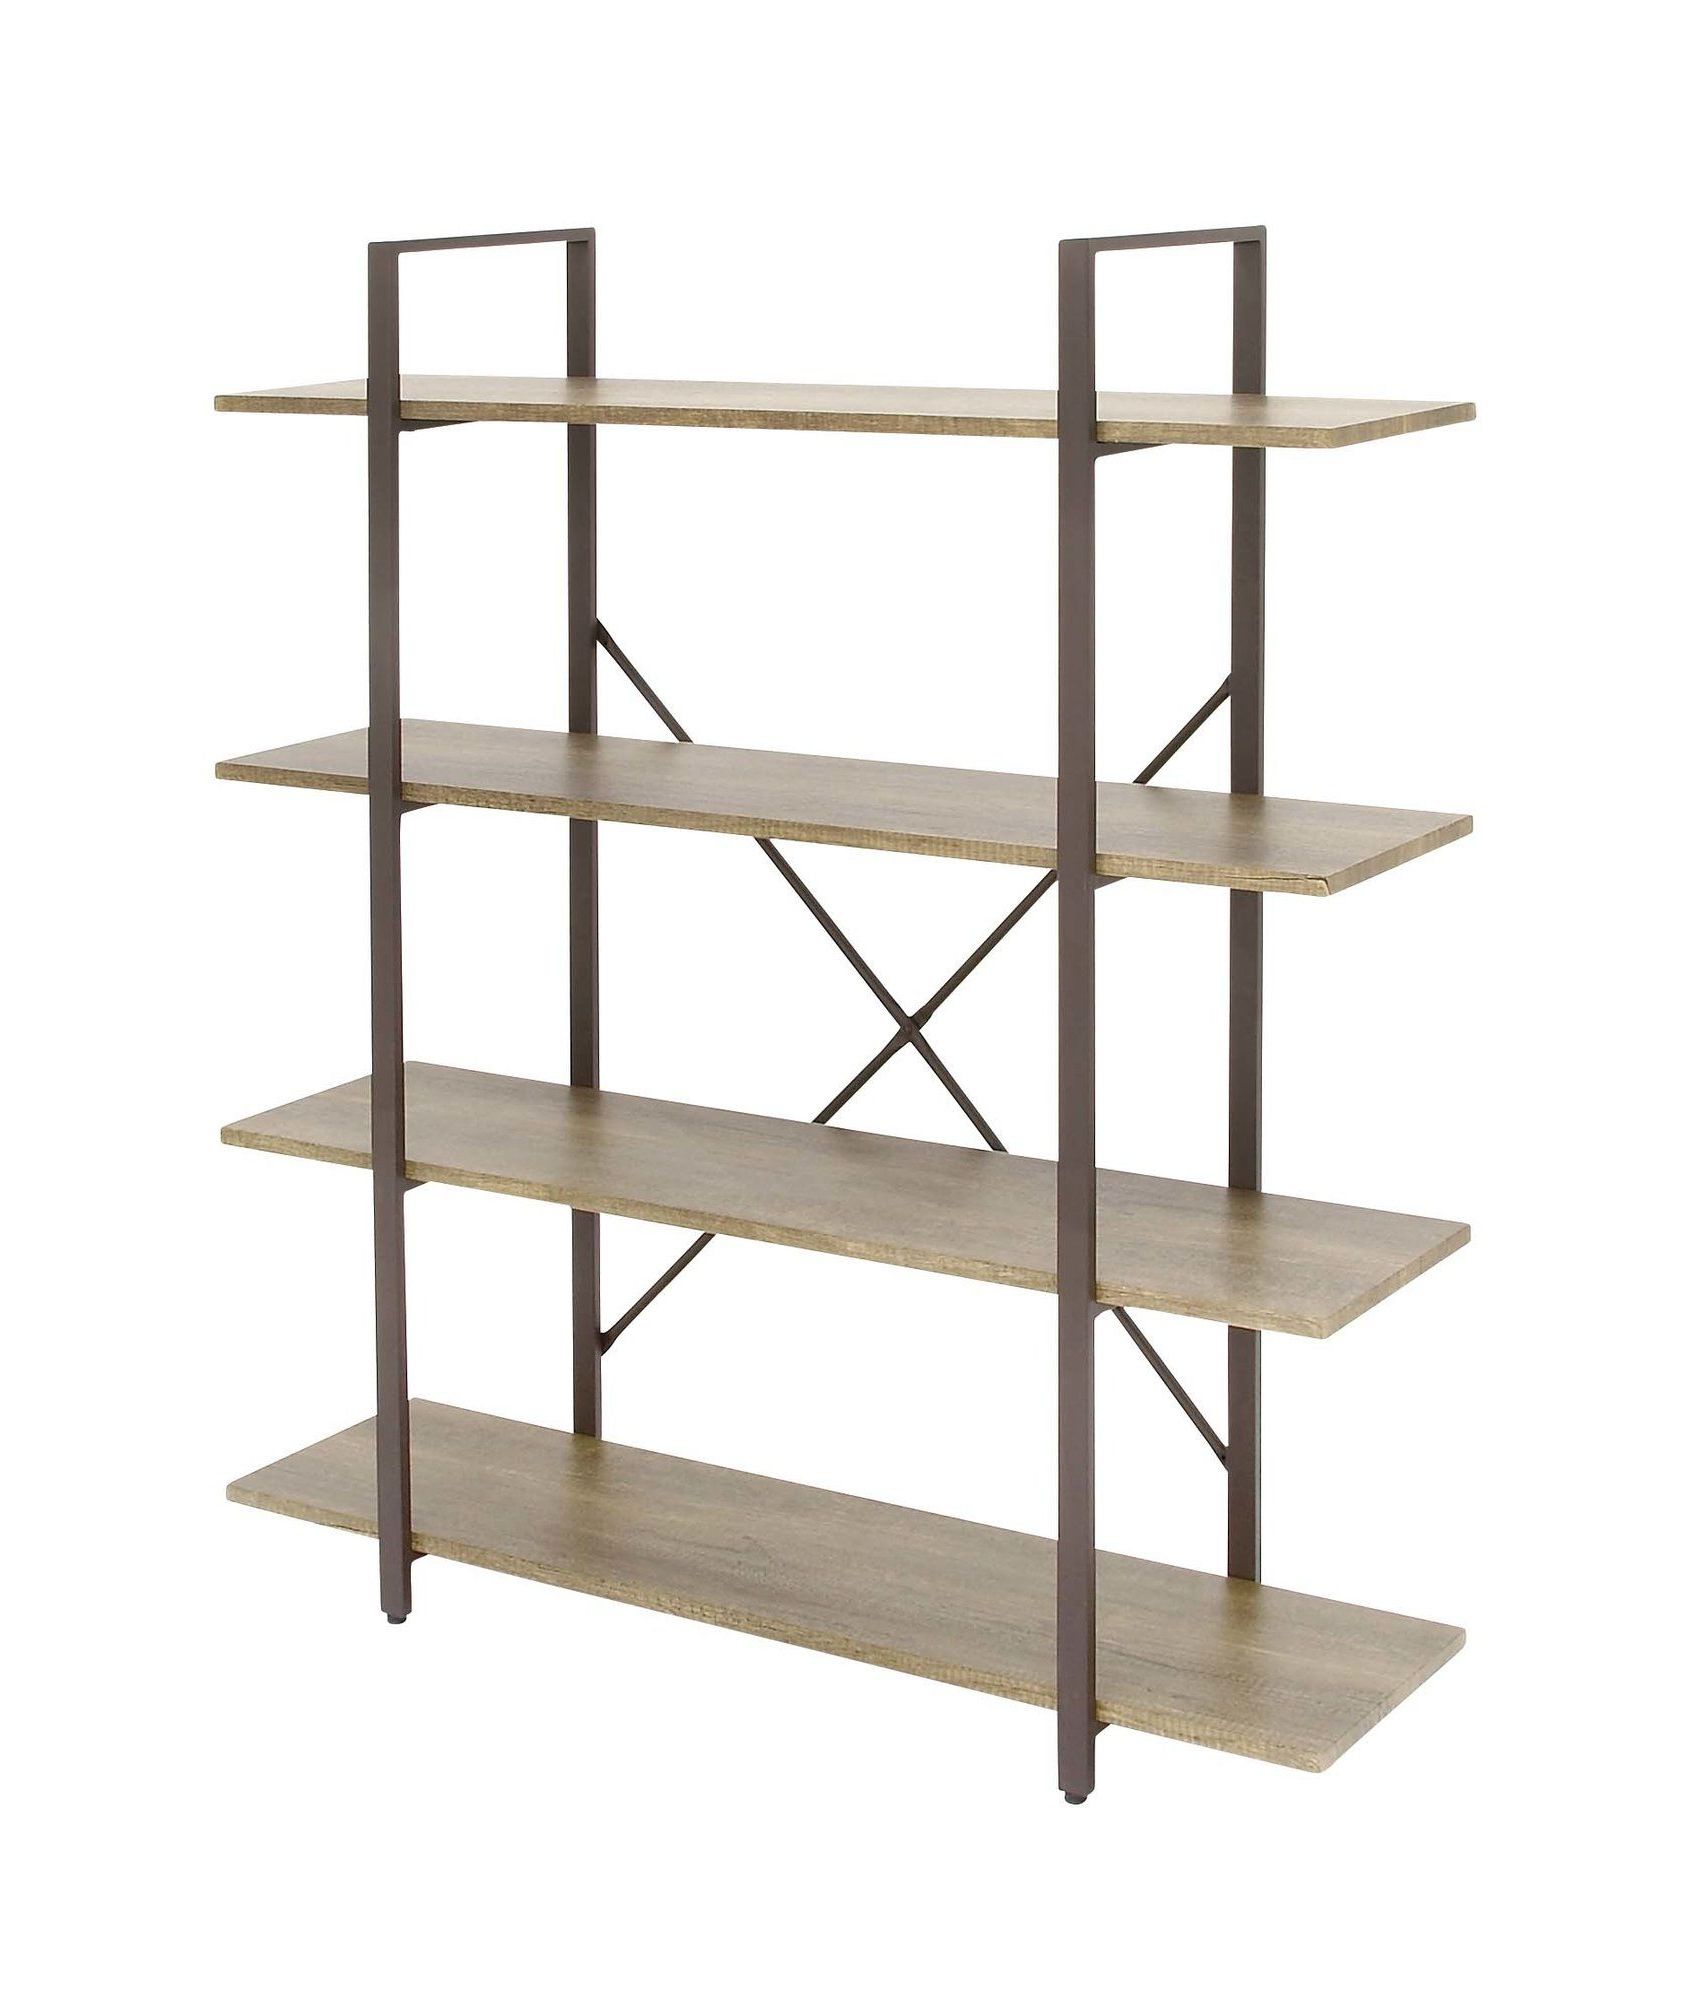 Etagere (View 8 of 20)